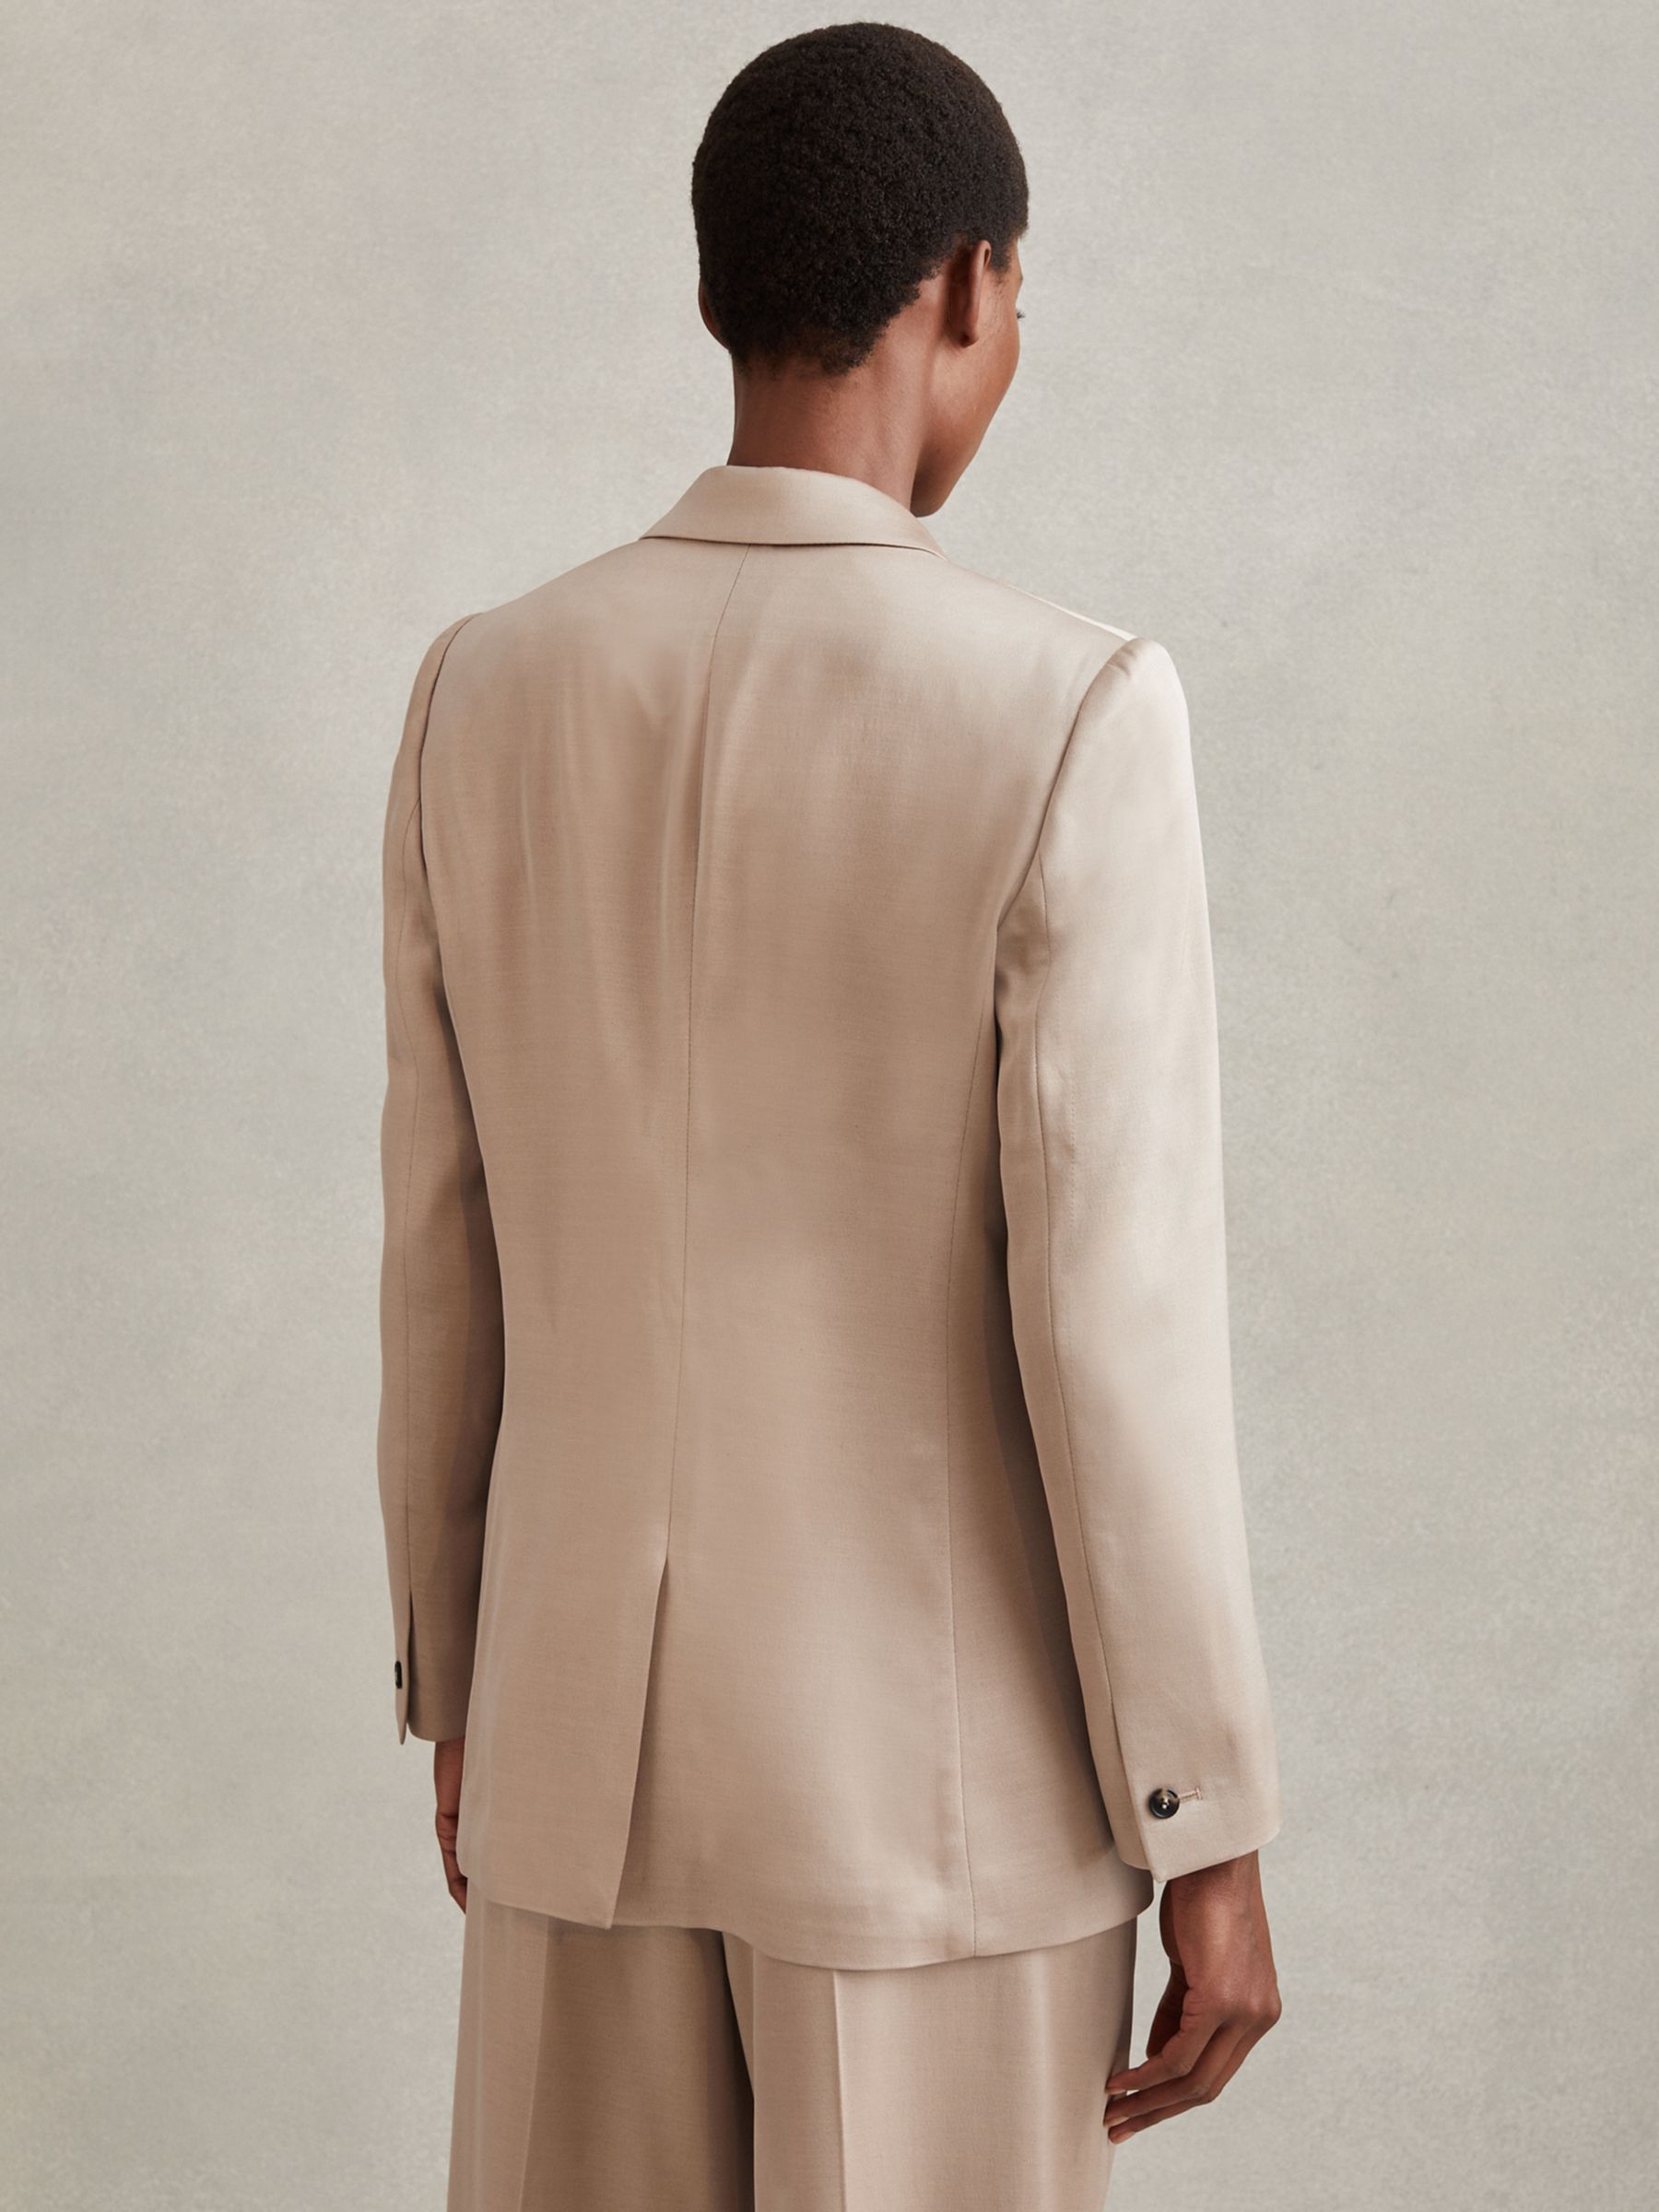 Buy Reiss Cole Single Breasted Satin Suit Blazer, Gold Online at johnlewis.com